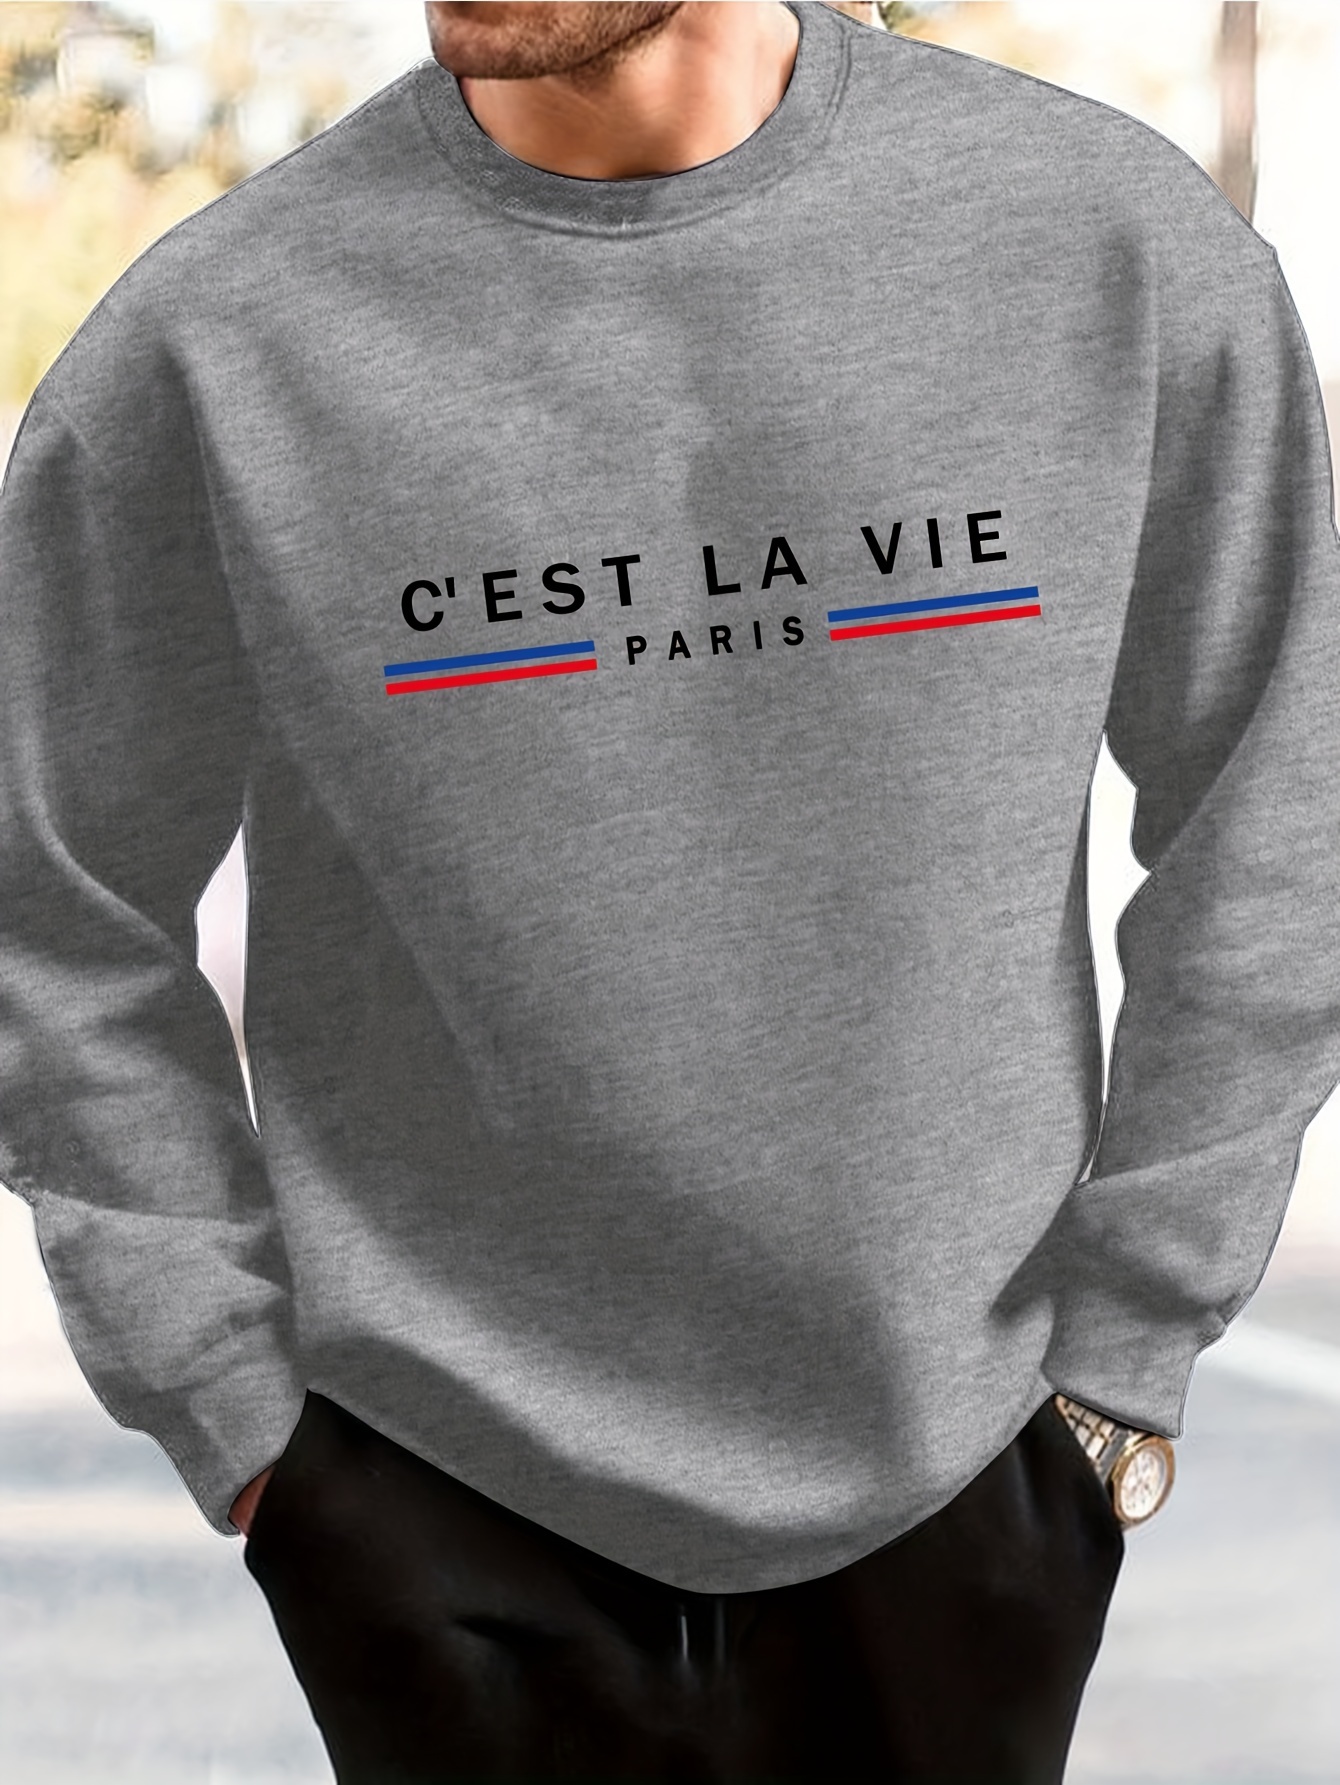 Men’s Letters Print Graphic Sweatshirt – Loose Fit Pullover for Autumn/Winter